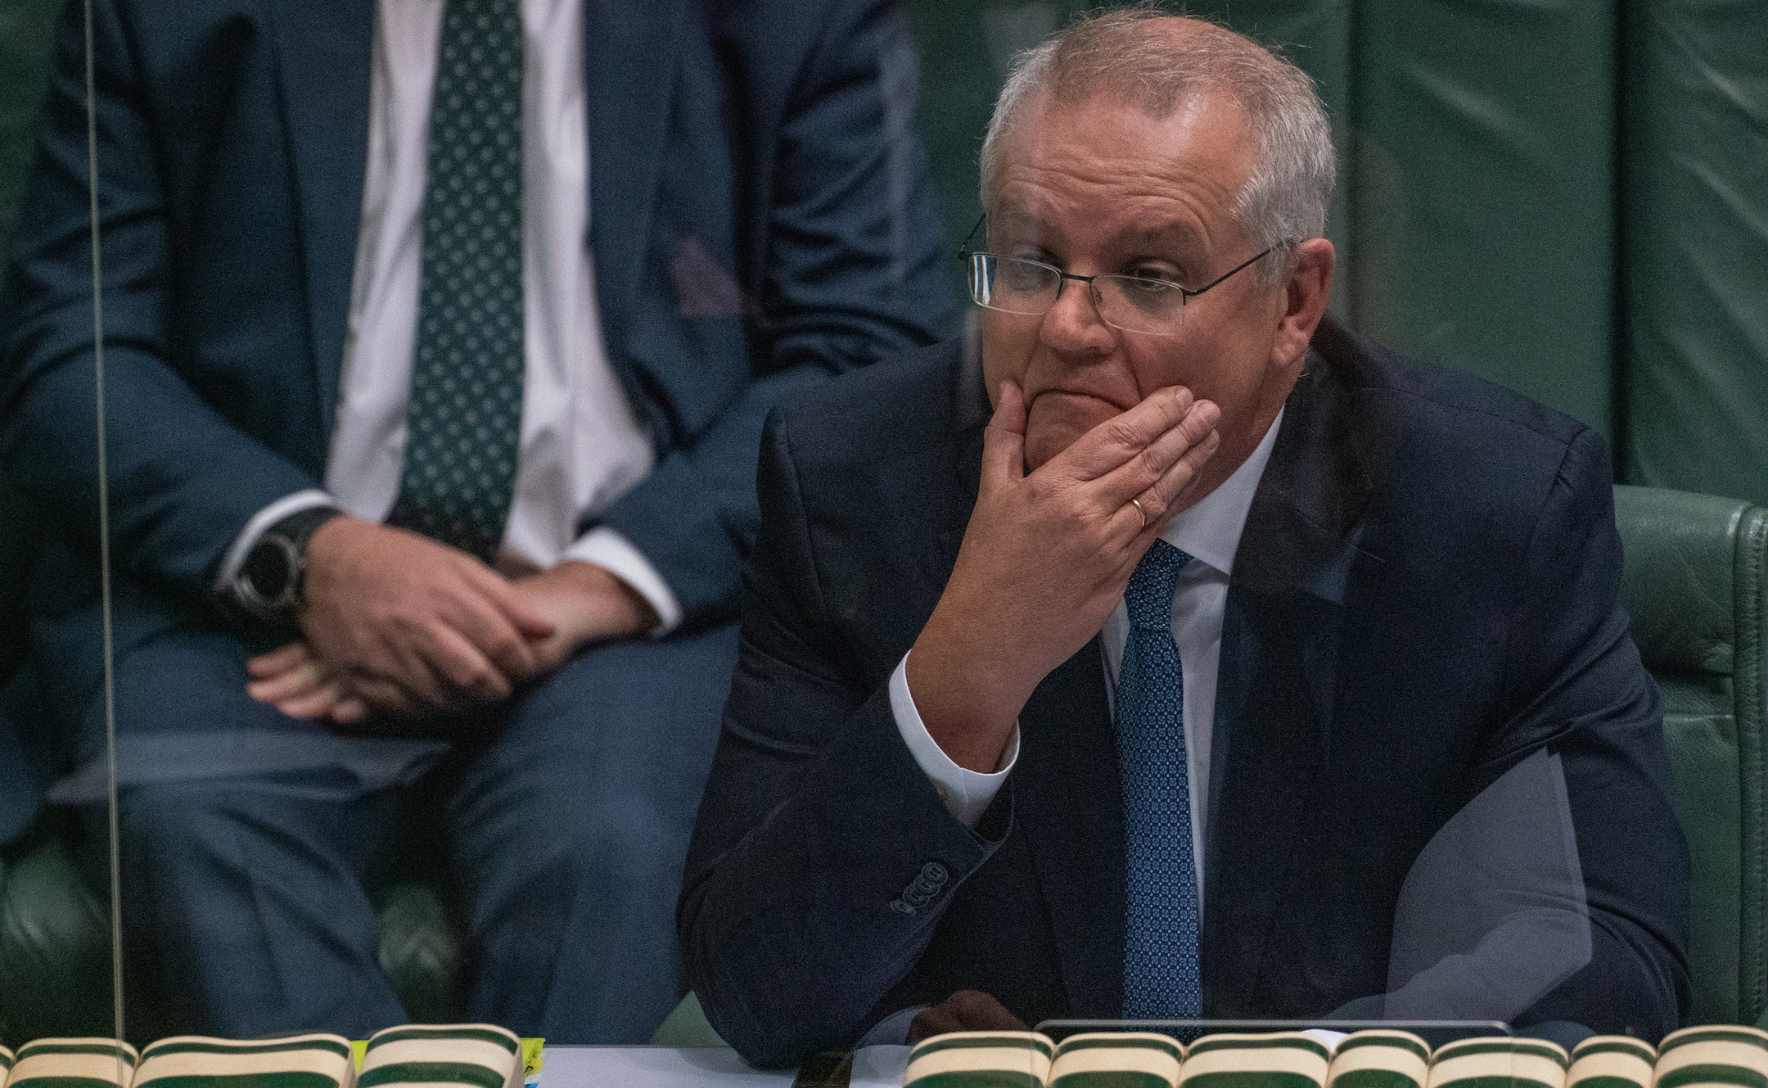 Prime Minister Scott Morrison sitting in parliament behind a sheet of plexiglas. He is grimacing and has a hand on his chin.